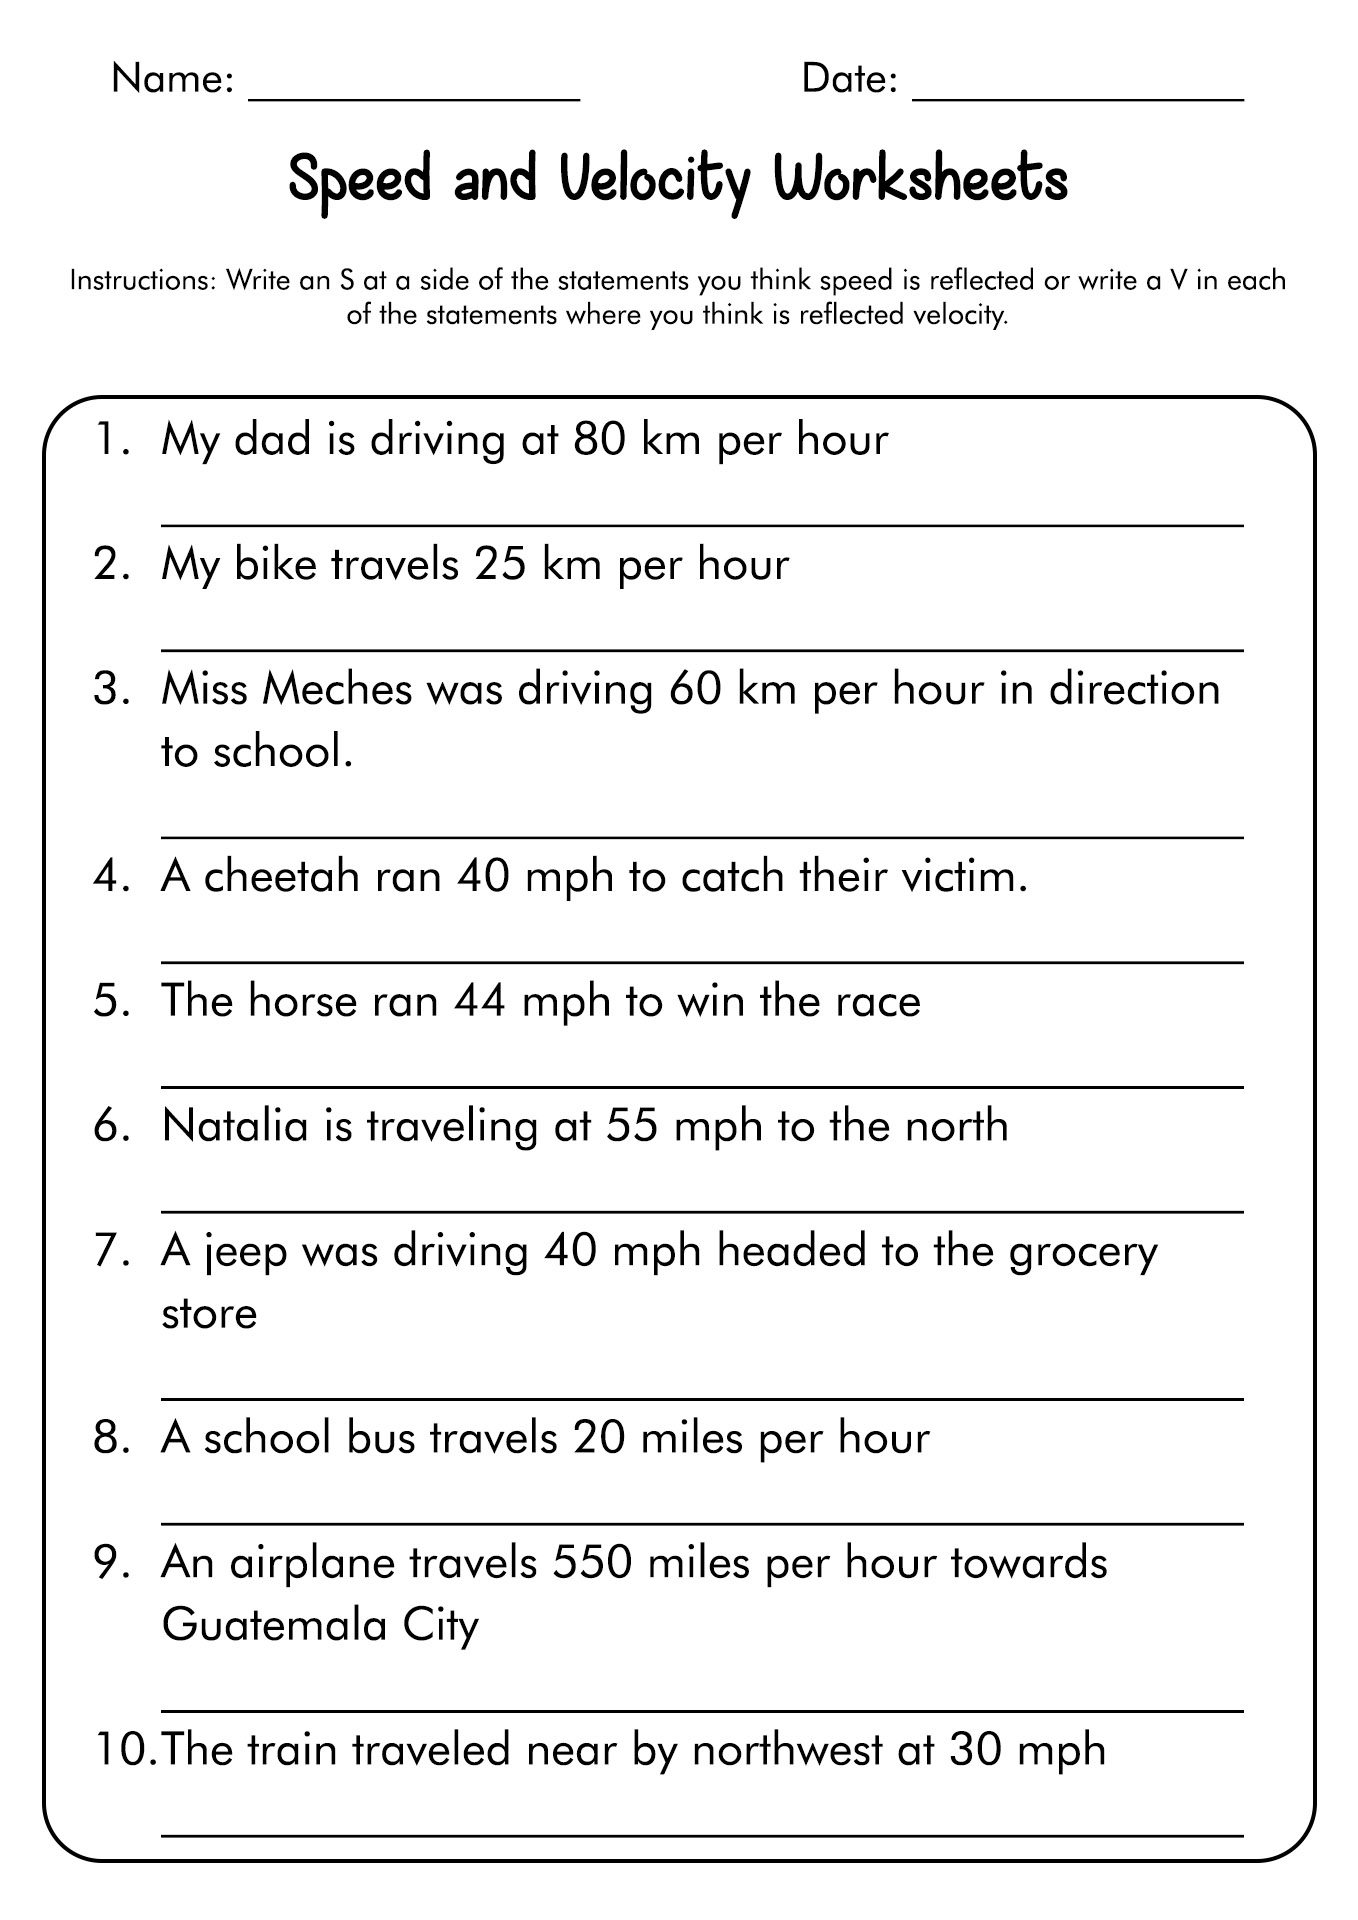 Speed and Velocity Worksheets